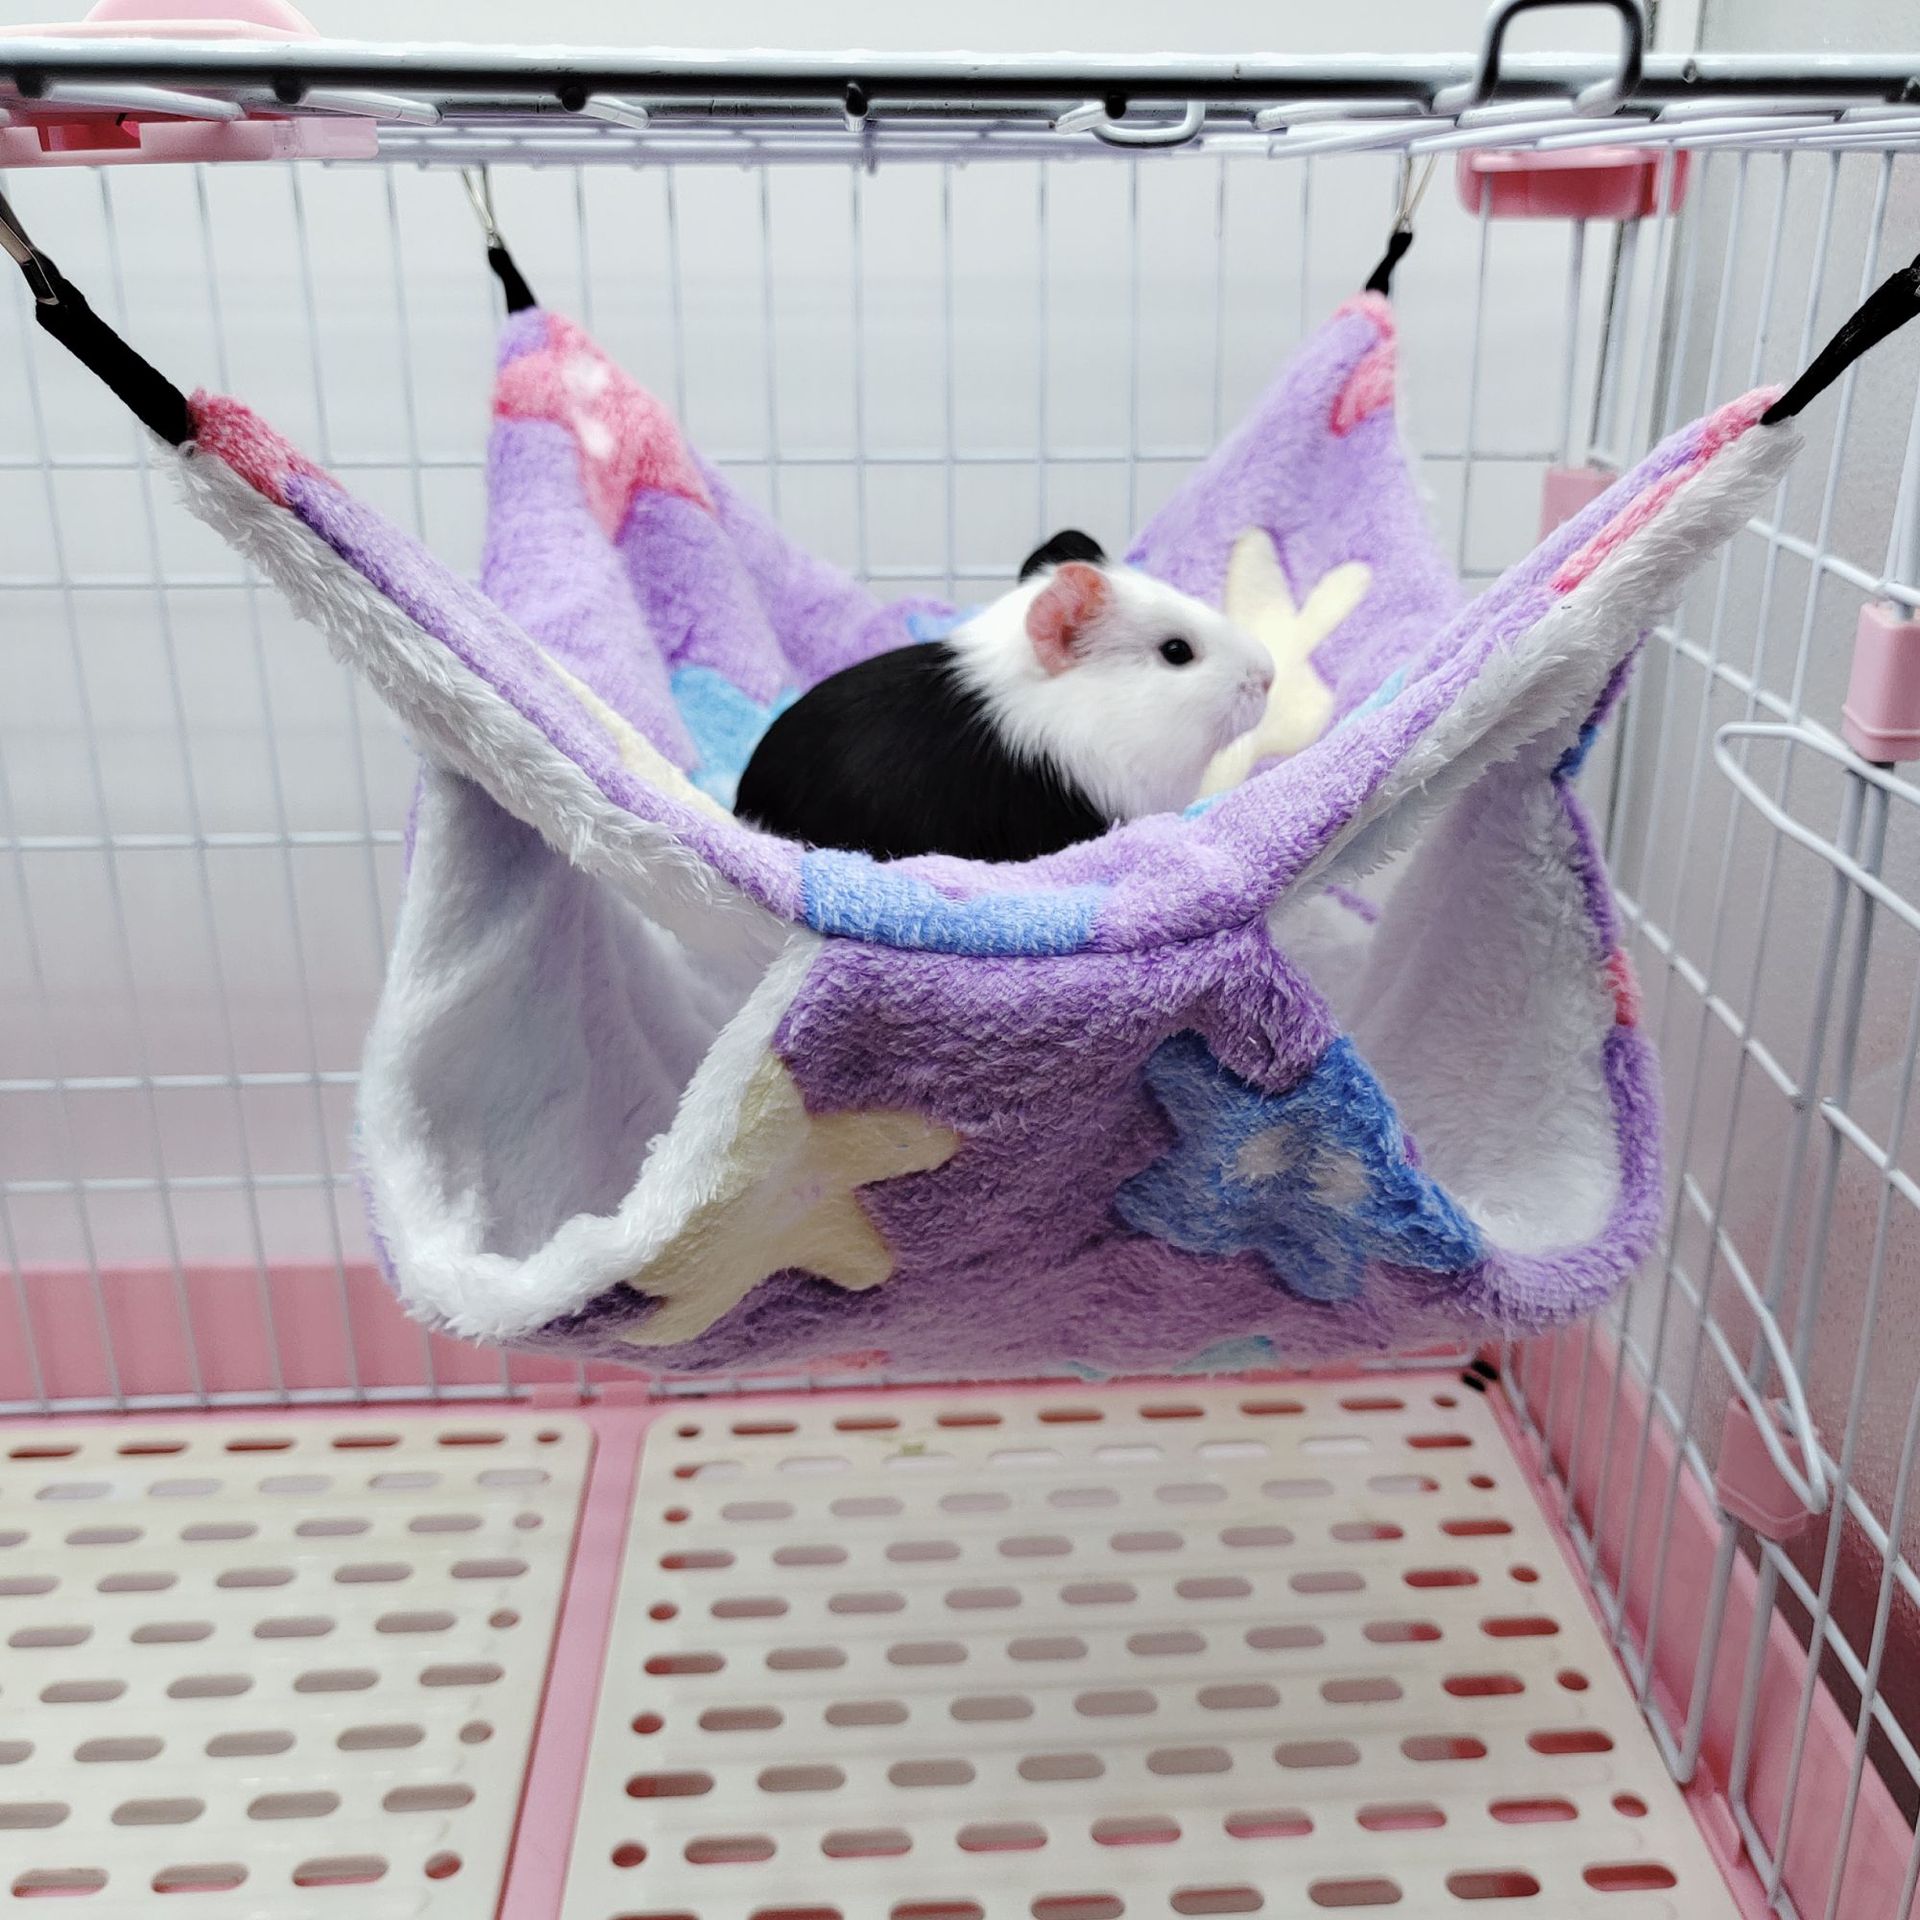 Cozy Hanging Bed for Pet Birds Hamsters and Guinea Pigs - Fun Cage